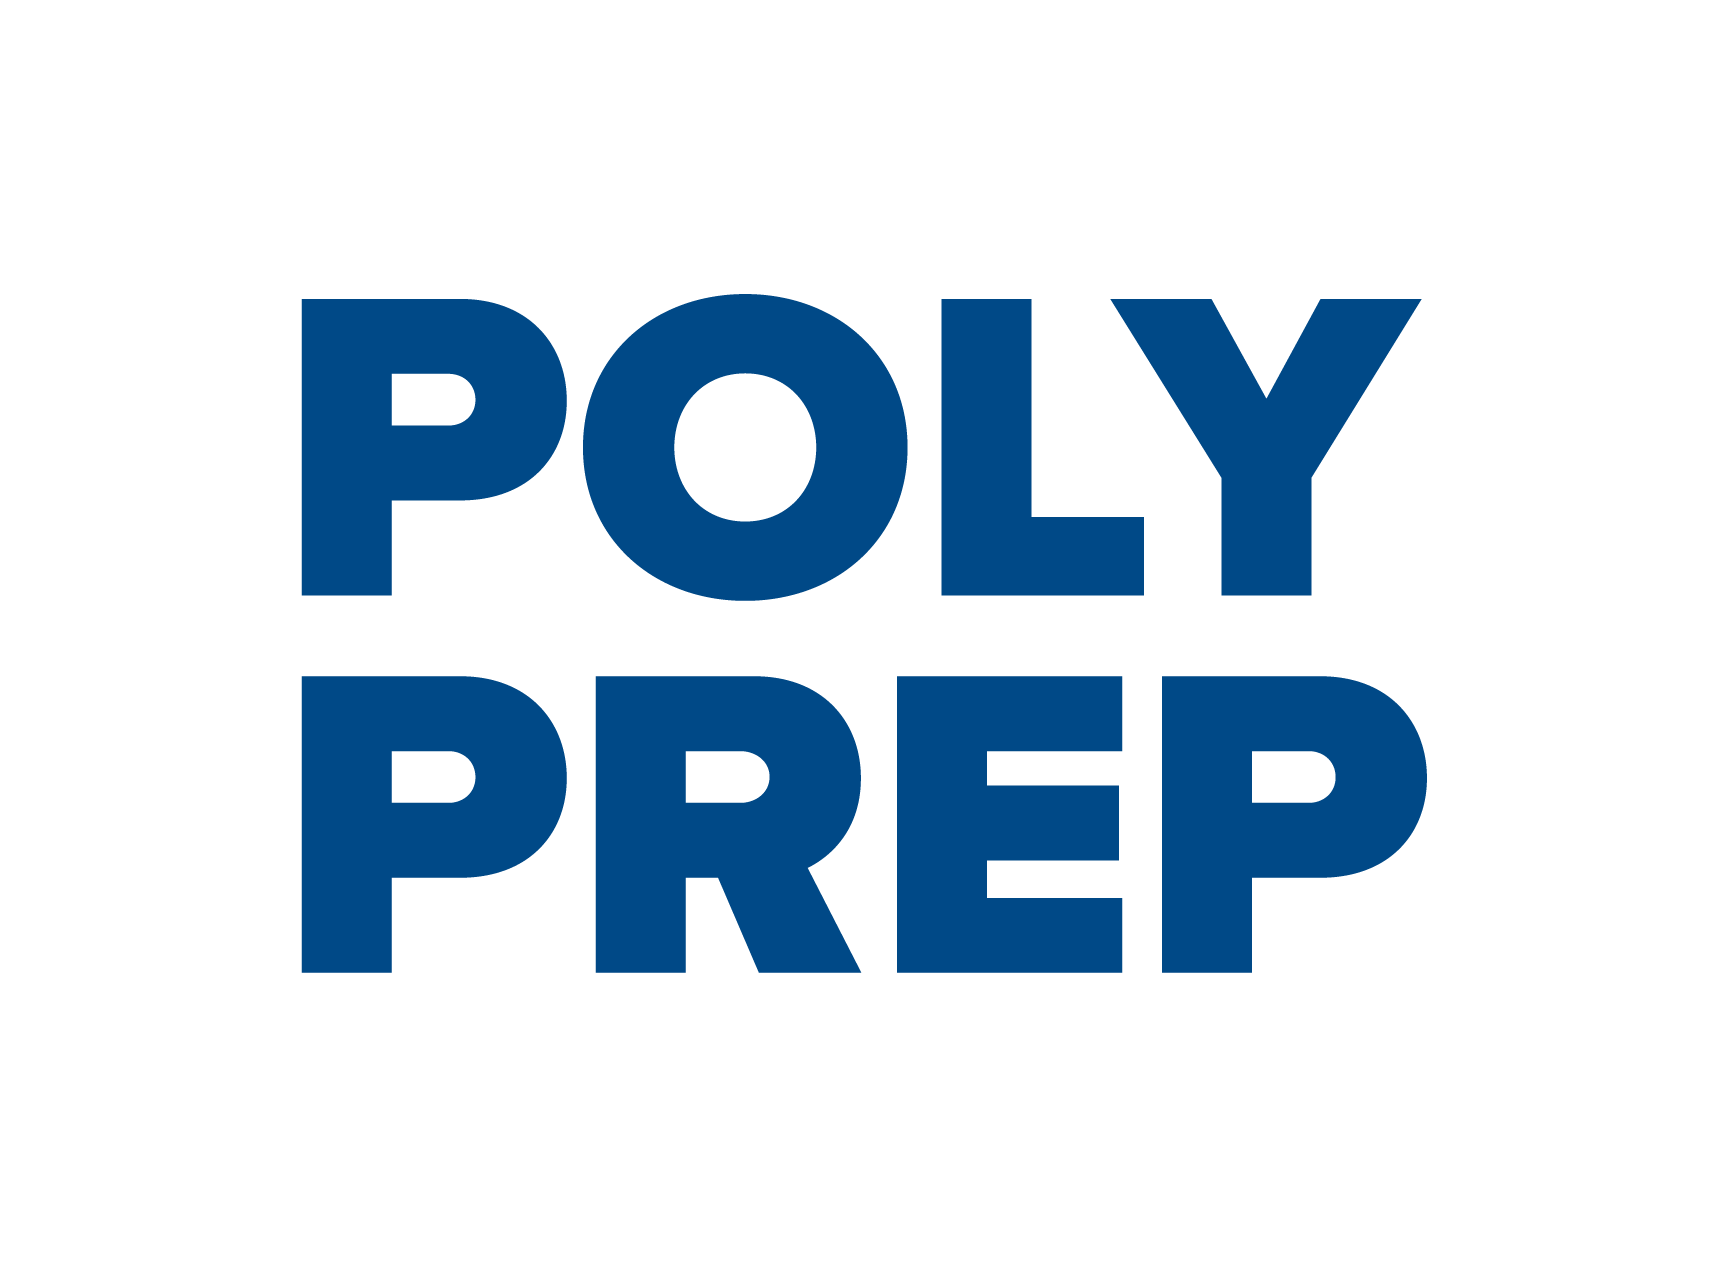 Poly_Logotype Stacked_Navy.png